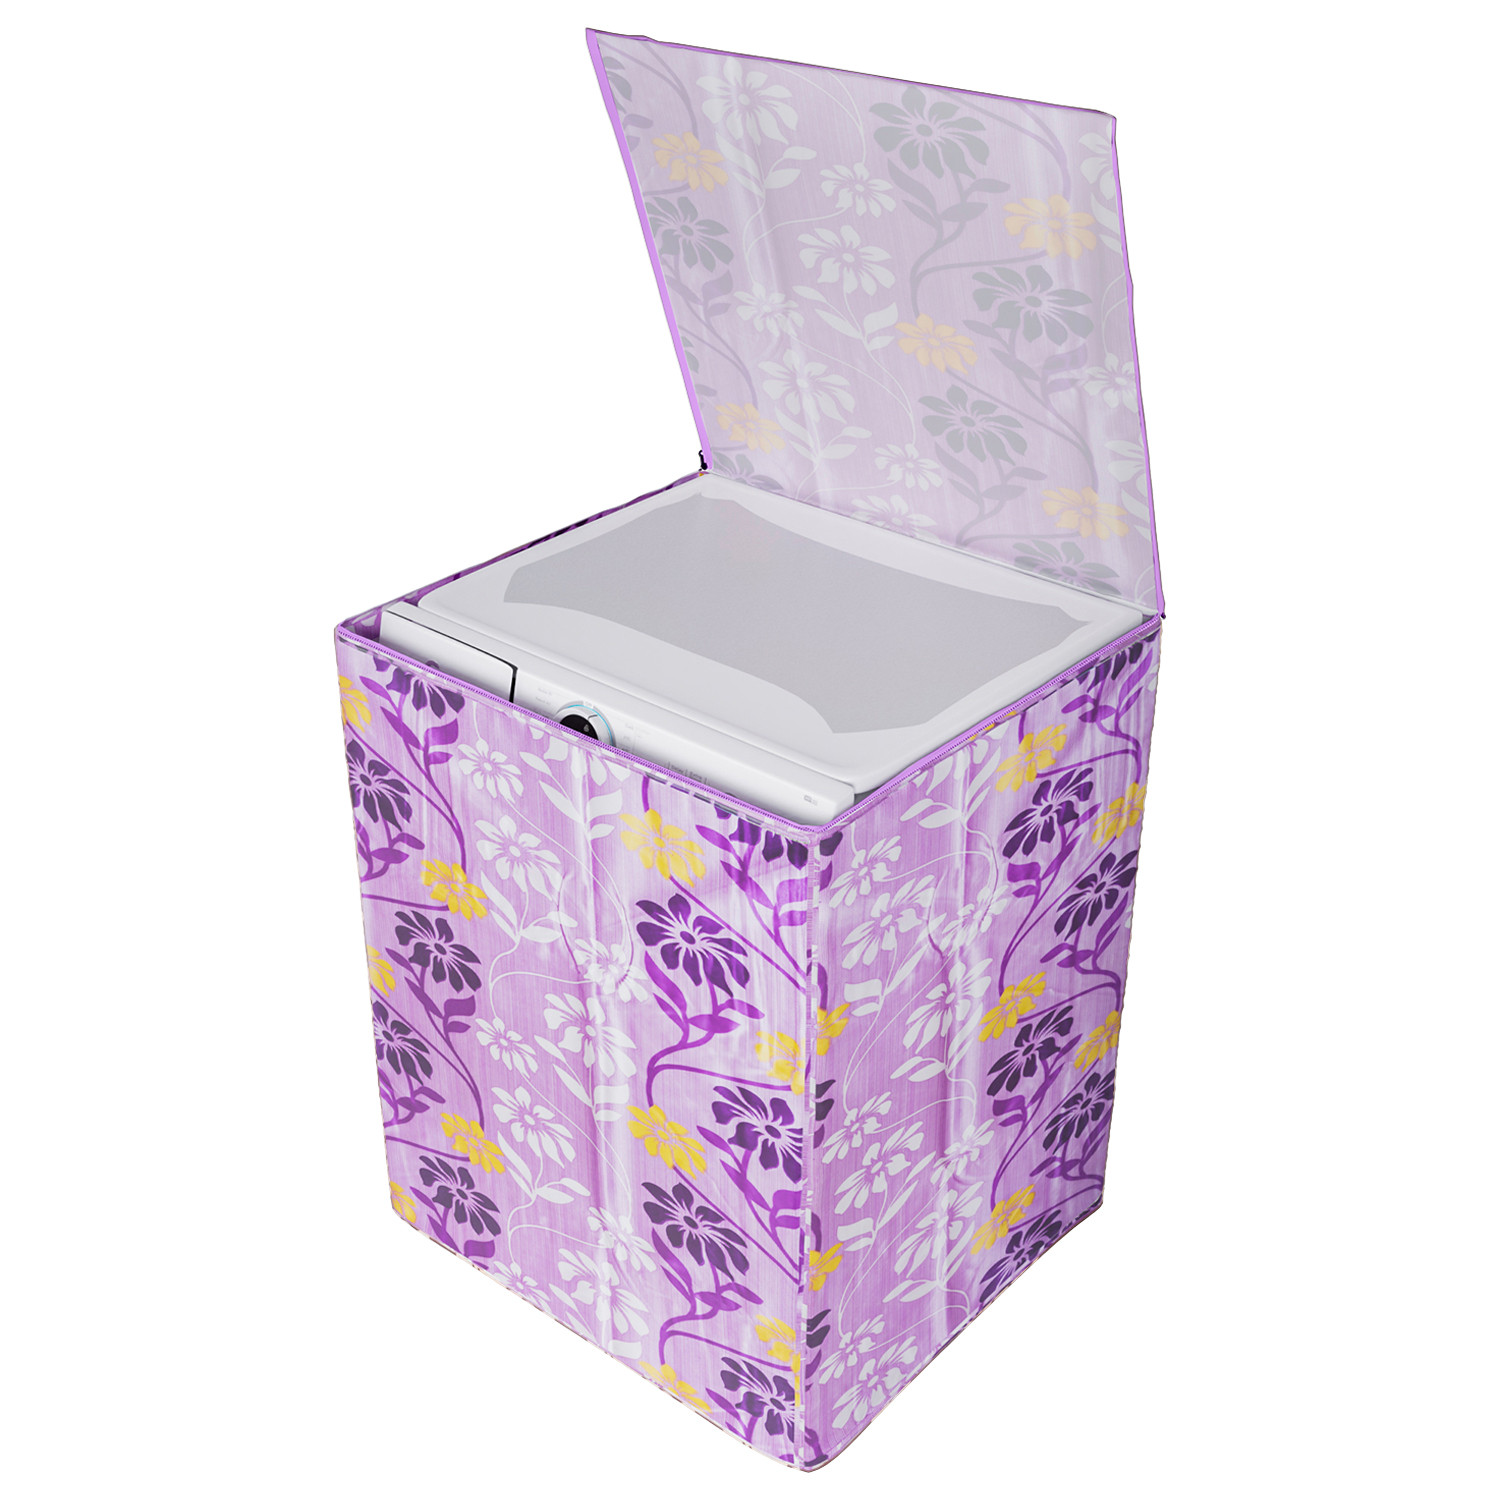 Kuber Industries Washing Machine Cover | Flower Print Washing Machine Cover | Knitting Polyester | Top Load Fully-Automatic Washing Machine Cover | Purple